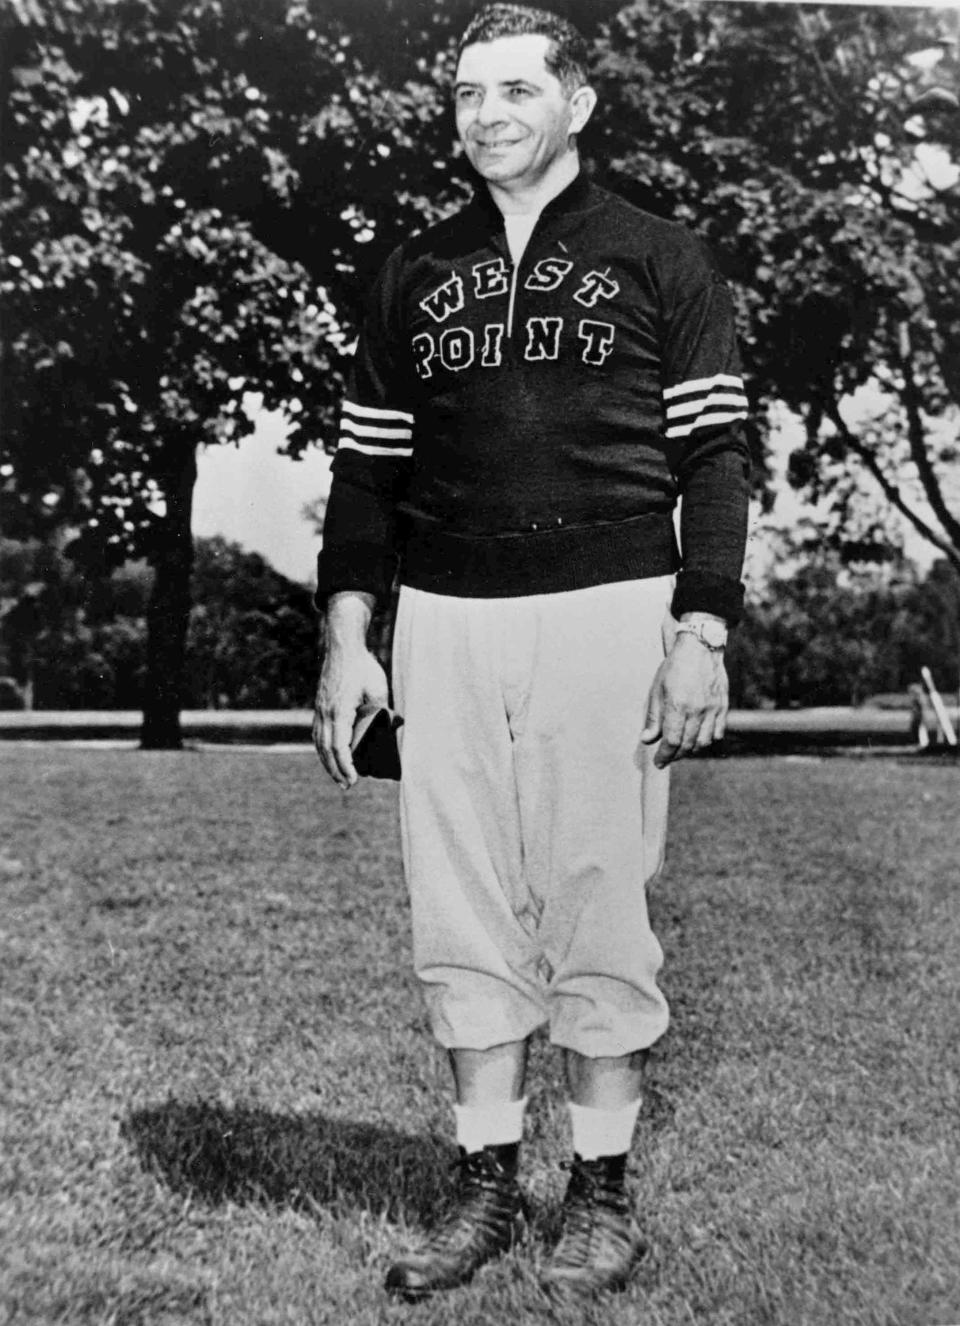 Hall of Fame coach Vince Lombardi. Lombardi was an assistant football coach at the United States Military Academy at West Point starting in 1948 until 1952.